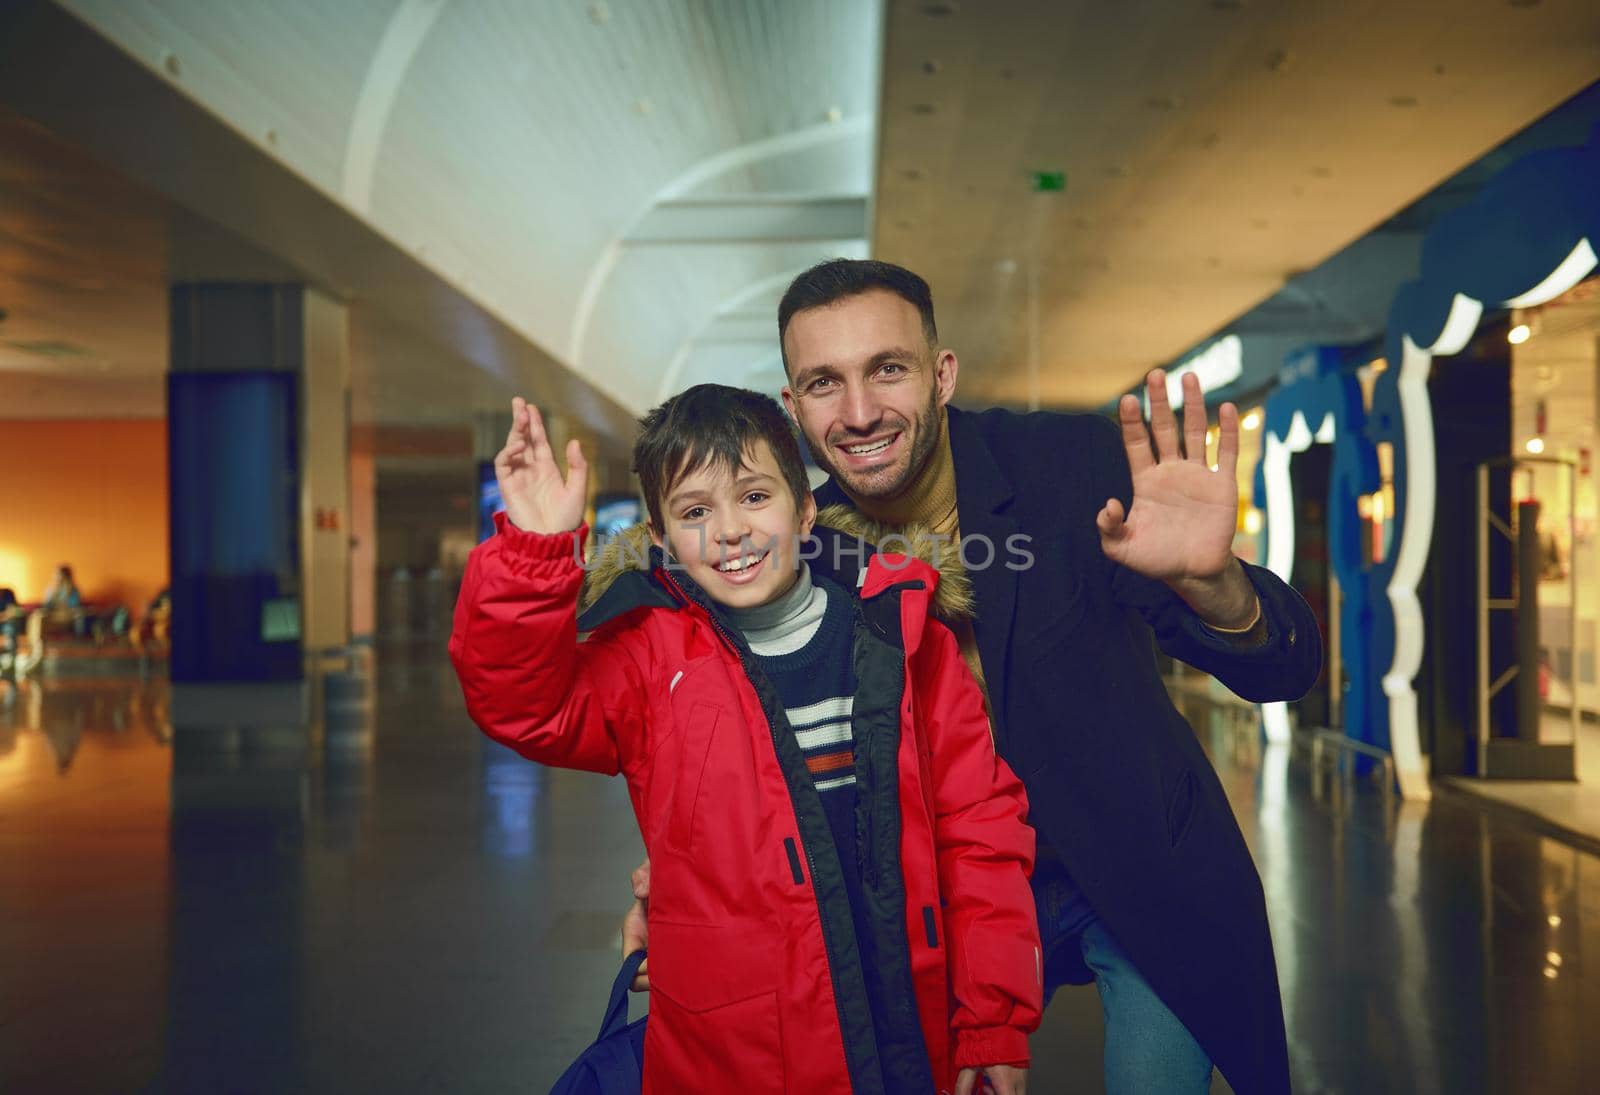 Handsome multi-ethnic man- dad and his son waving looking at camera while standing outside duty free shops in international airport departure terminal by artgf